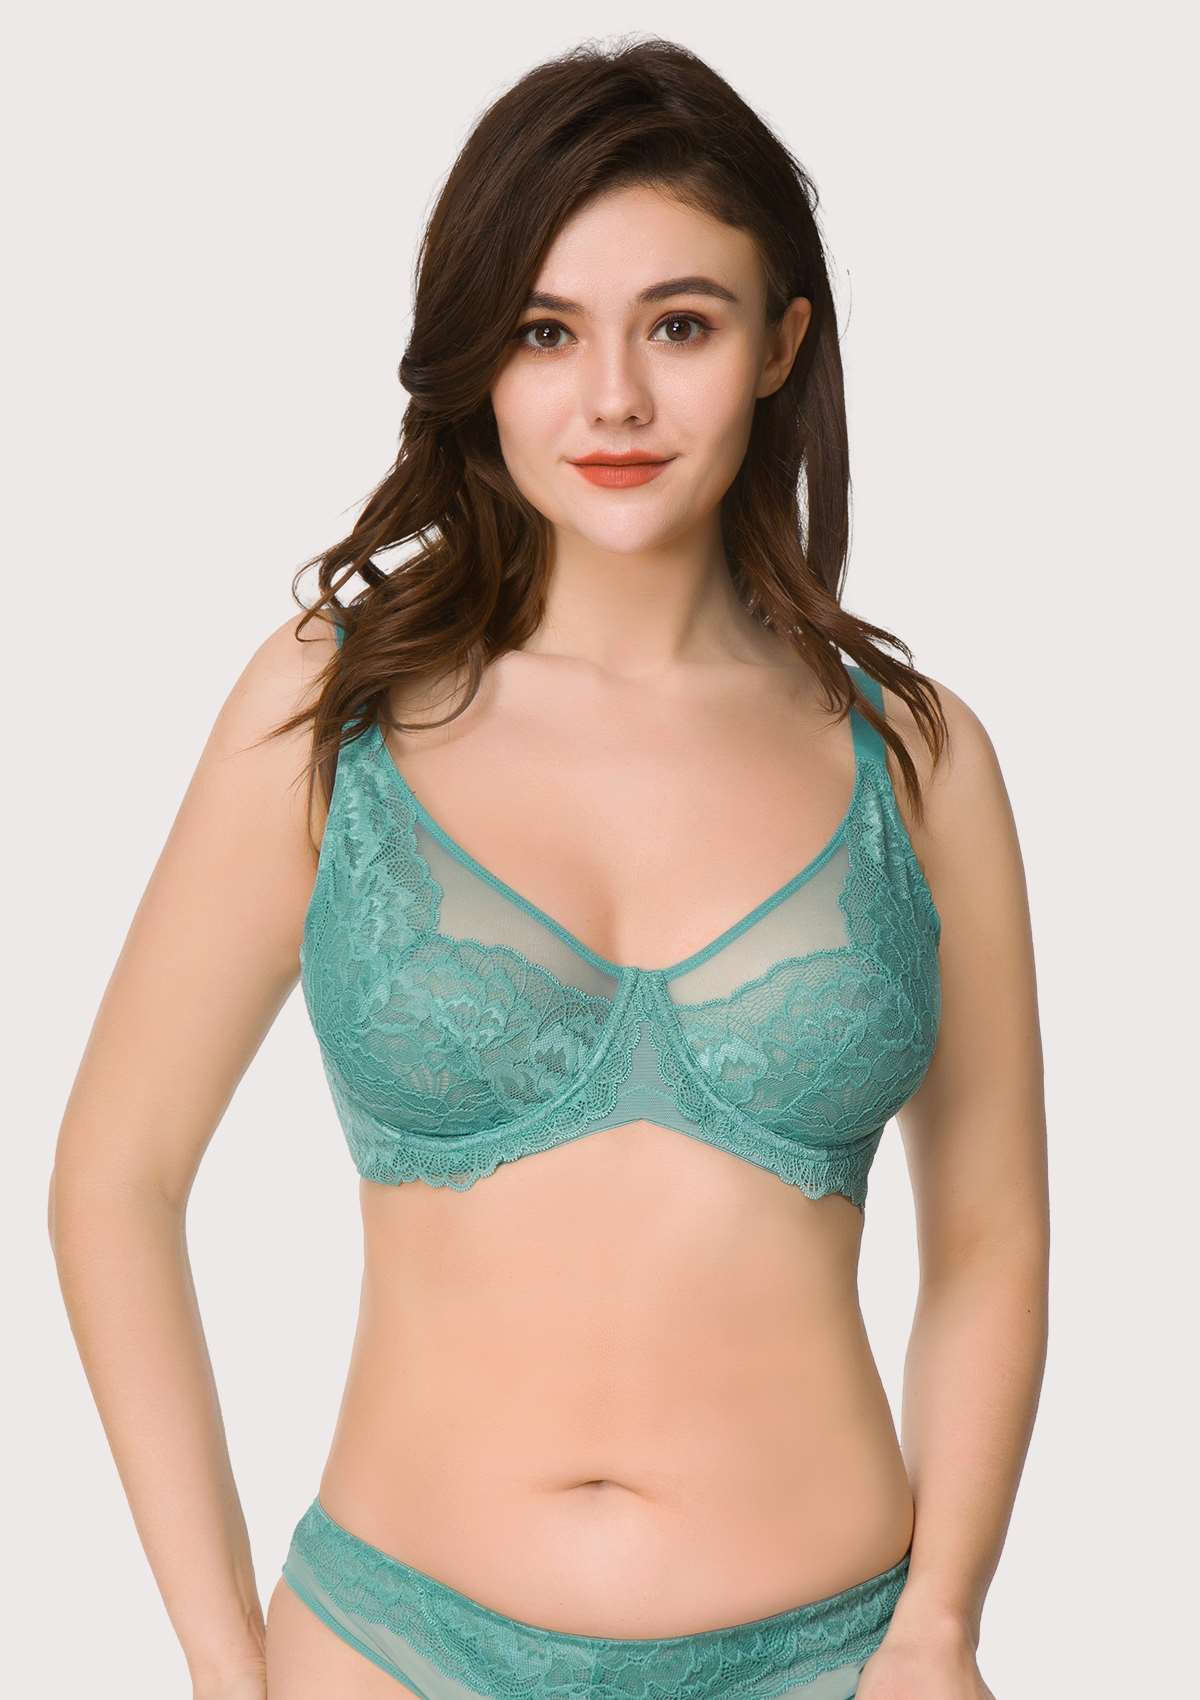 HSIA Peony Lace Unlined Supportive Underwire Bra - Dark Blue / 42 / C